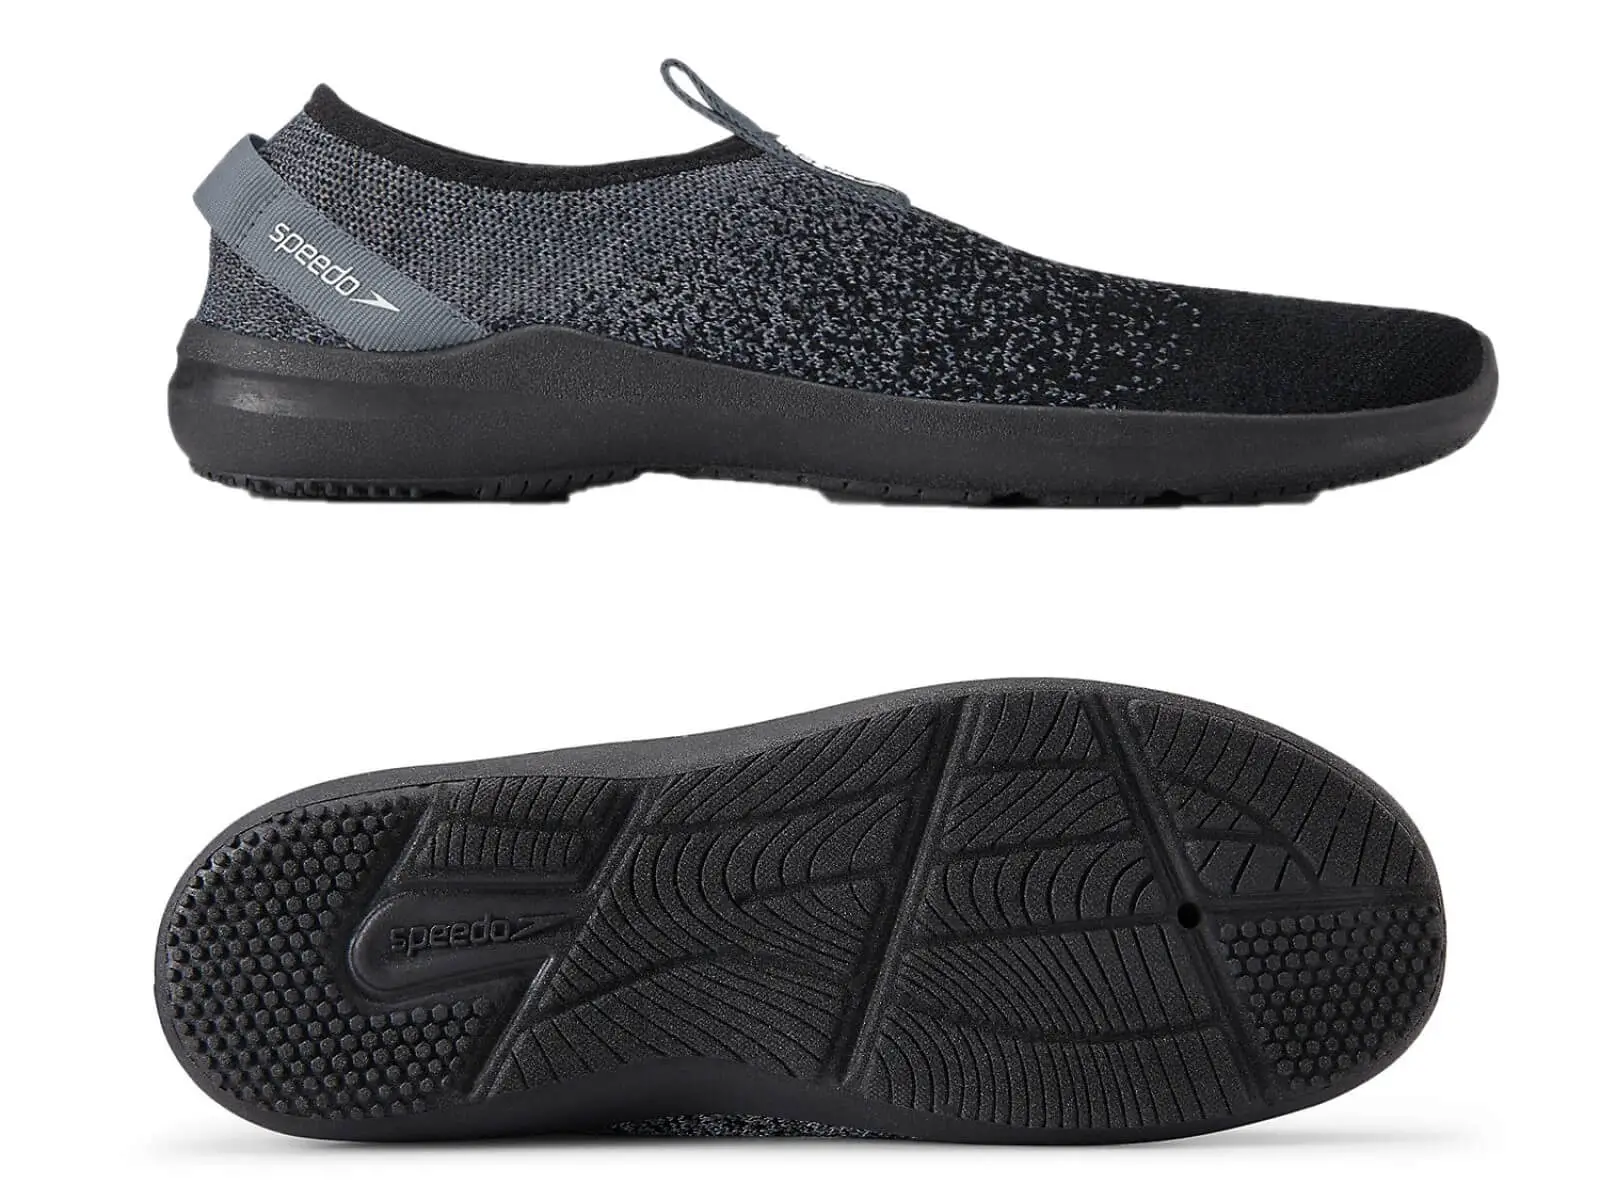 Speedo Surf Knit Pro grey and black in profile and the S-traction outsole system detail